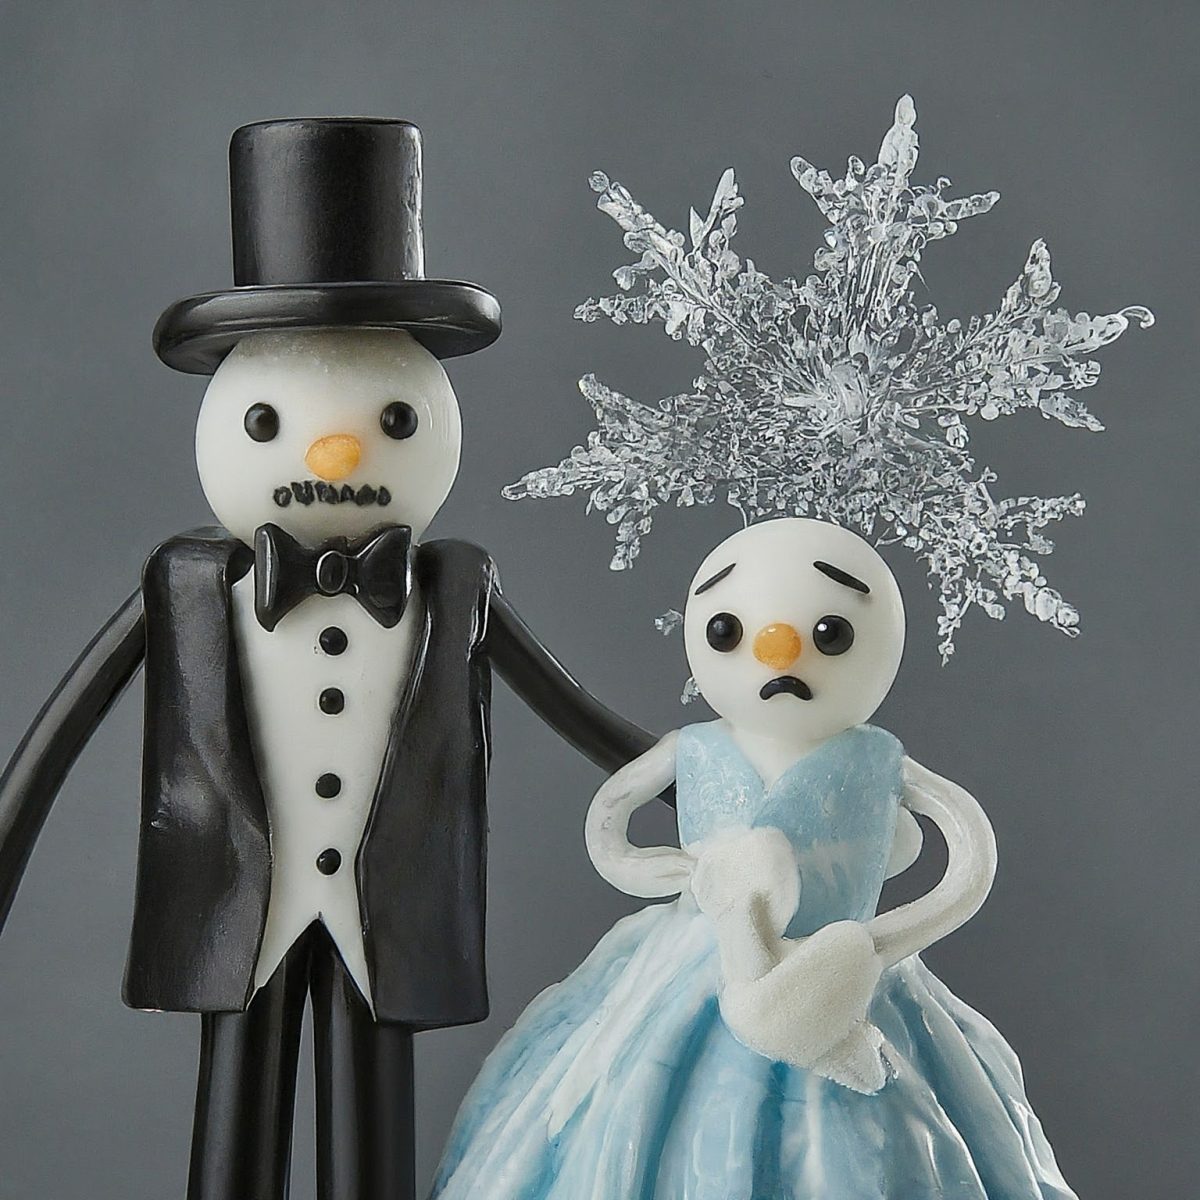 Two Snowflakes are sad their formal dance got canceled.